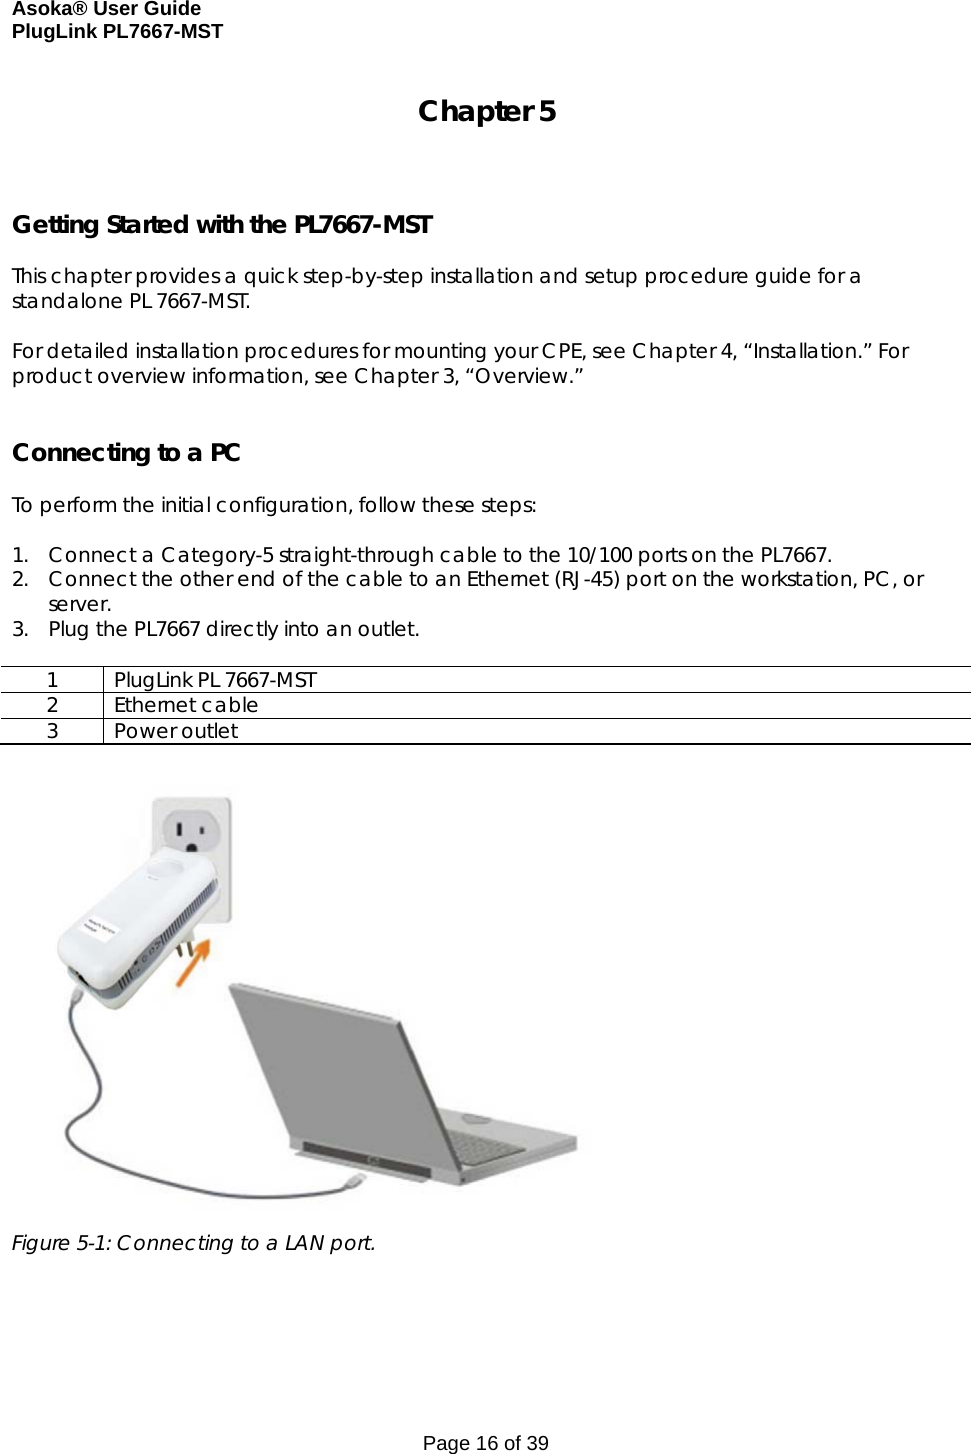 Asoka® User Guide  PlugLink PL7667-MST Page 16 of 39 Chapter 5    Getting Started with the PL7667-MST  This chapter provides a quick step-by-step installation and setup procedure guide for a standalone PL 7667-MST.   For detailed installation procedures for mounting your CPE, see Chapter 4, “Installation.” For product overview information, see Chapter 3, “Overview.”   Connecting to a PC  To perform the initial configuration, follow these steps:  1. Connect a Category-5 straight-through cable to the 10/100 ports on the PL7667.  2. Connect the other end of the cable to an Ethernet (RJ-45) port on the workstation, PC, or server. 3. Plug the PL7667 directly into an outlet.  1  PlugLink PL 7667-MST 2 Ethernet cable 3 Power outlet   Figure 5-1: Connecting to a LAN port.      